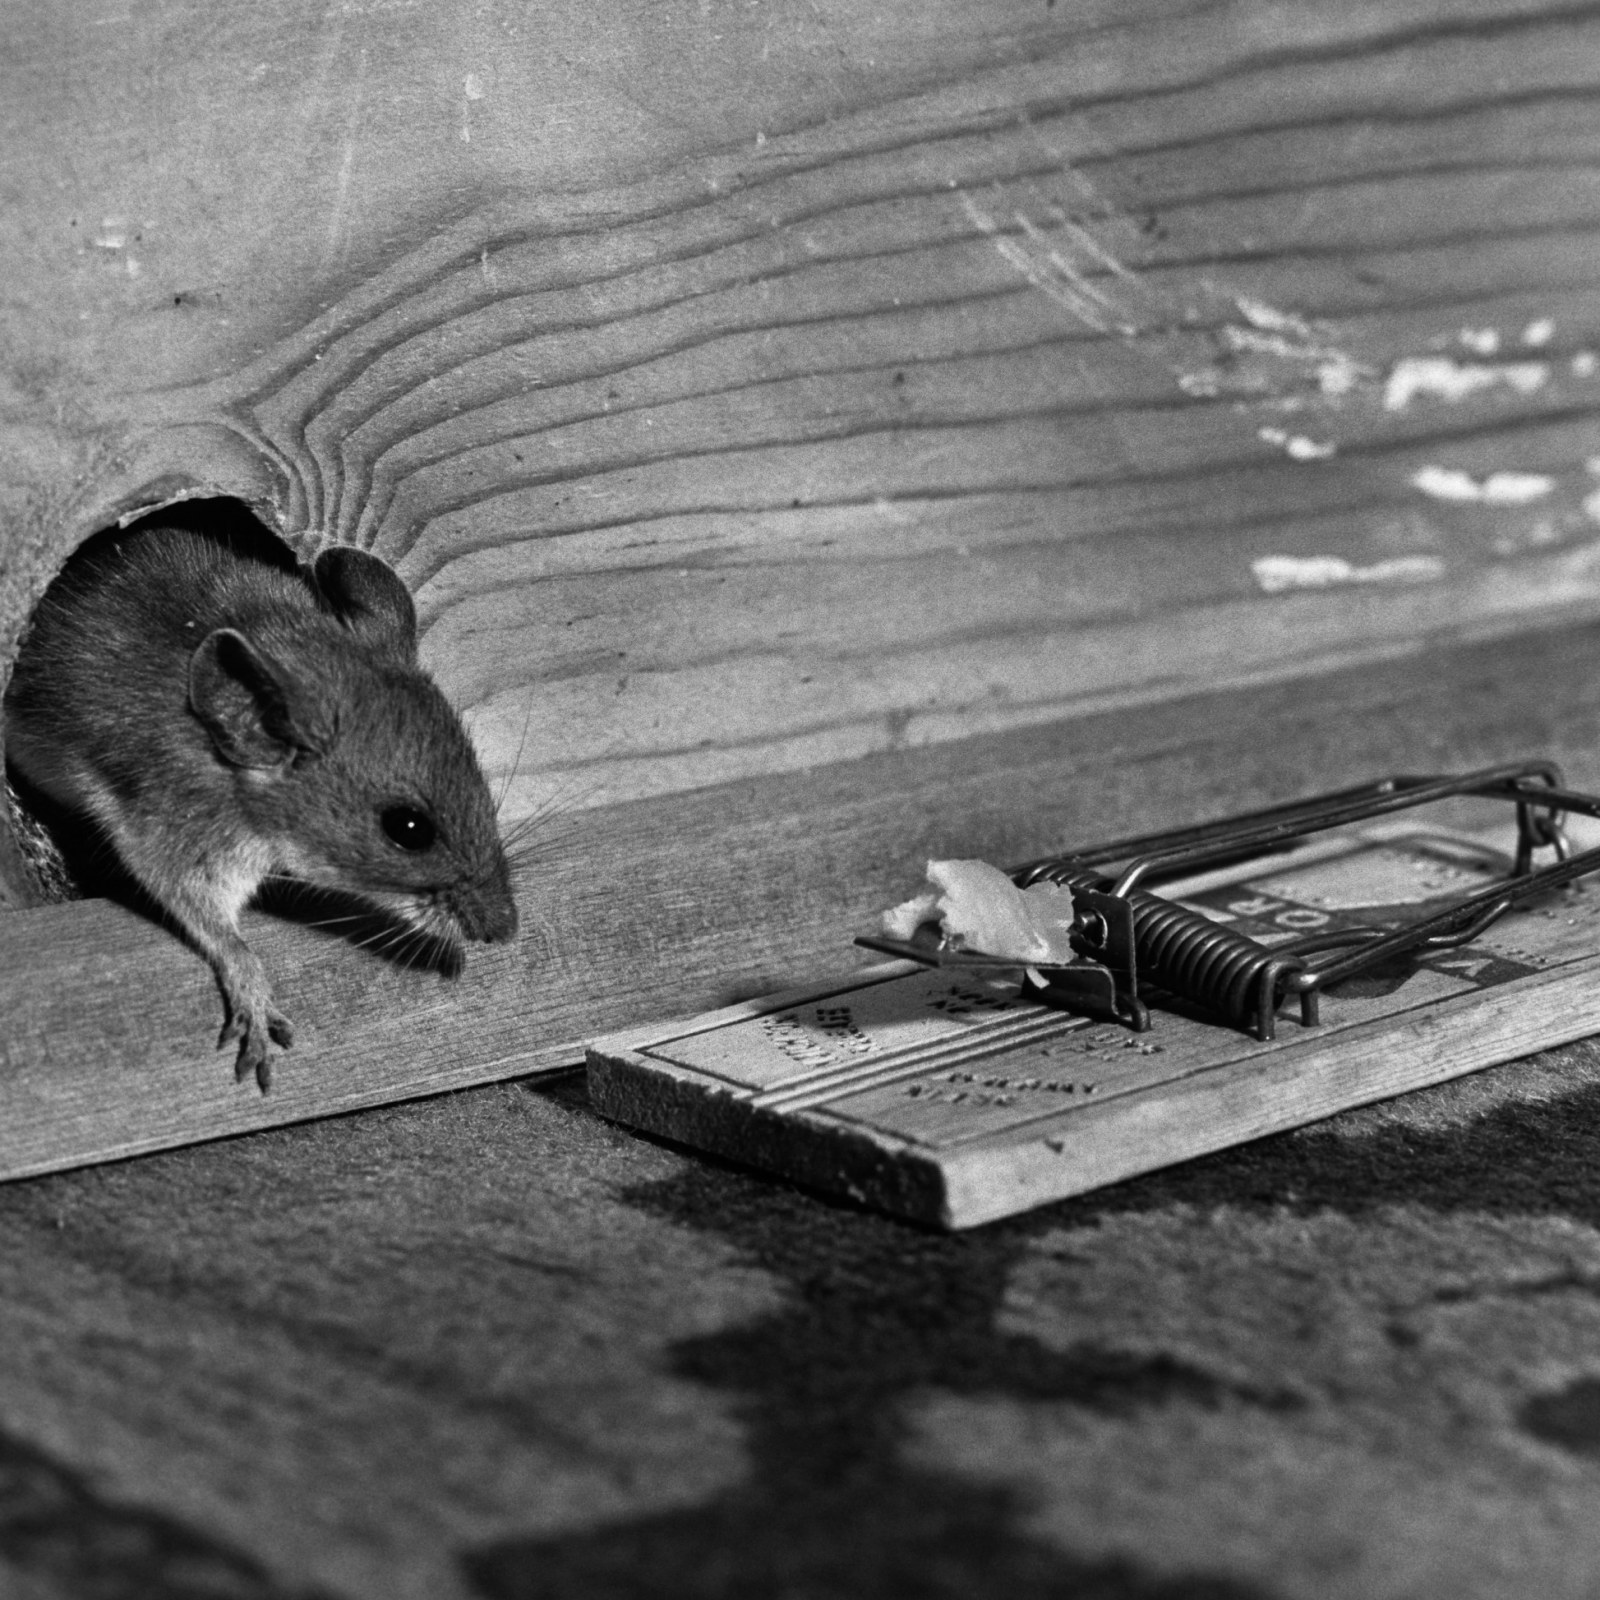 I Invented The Greatest Mouse Trap Ever Made - Over 300 Mice